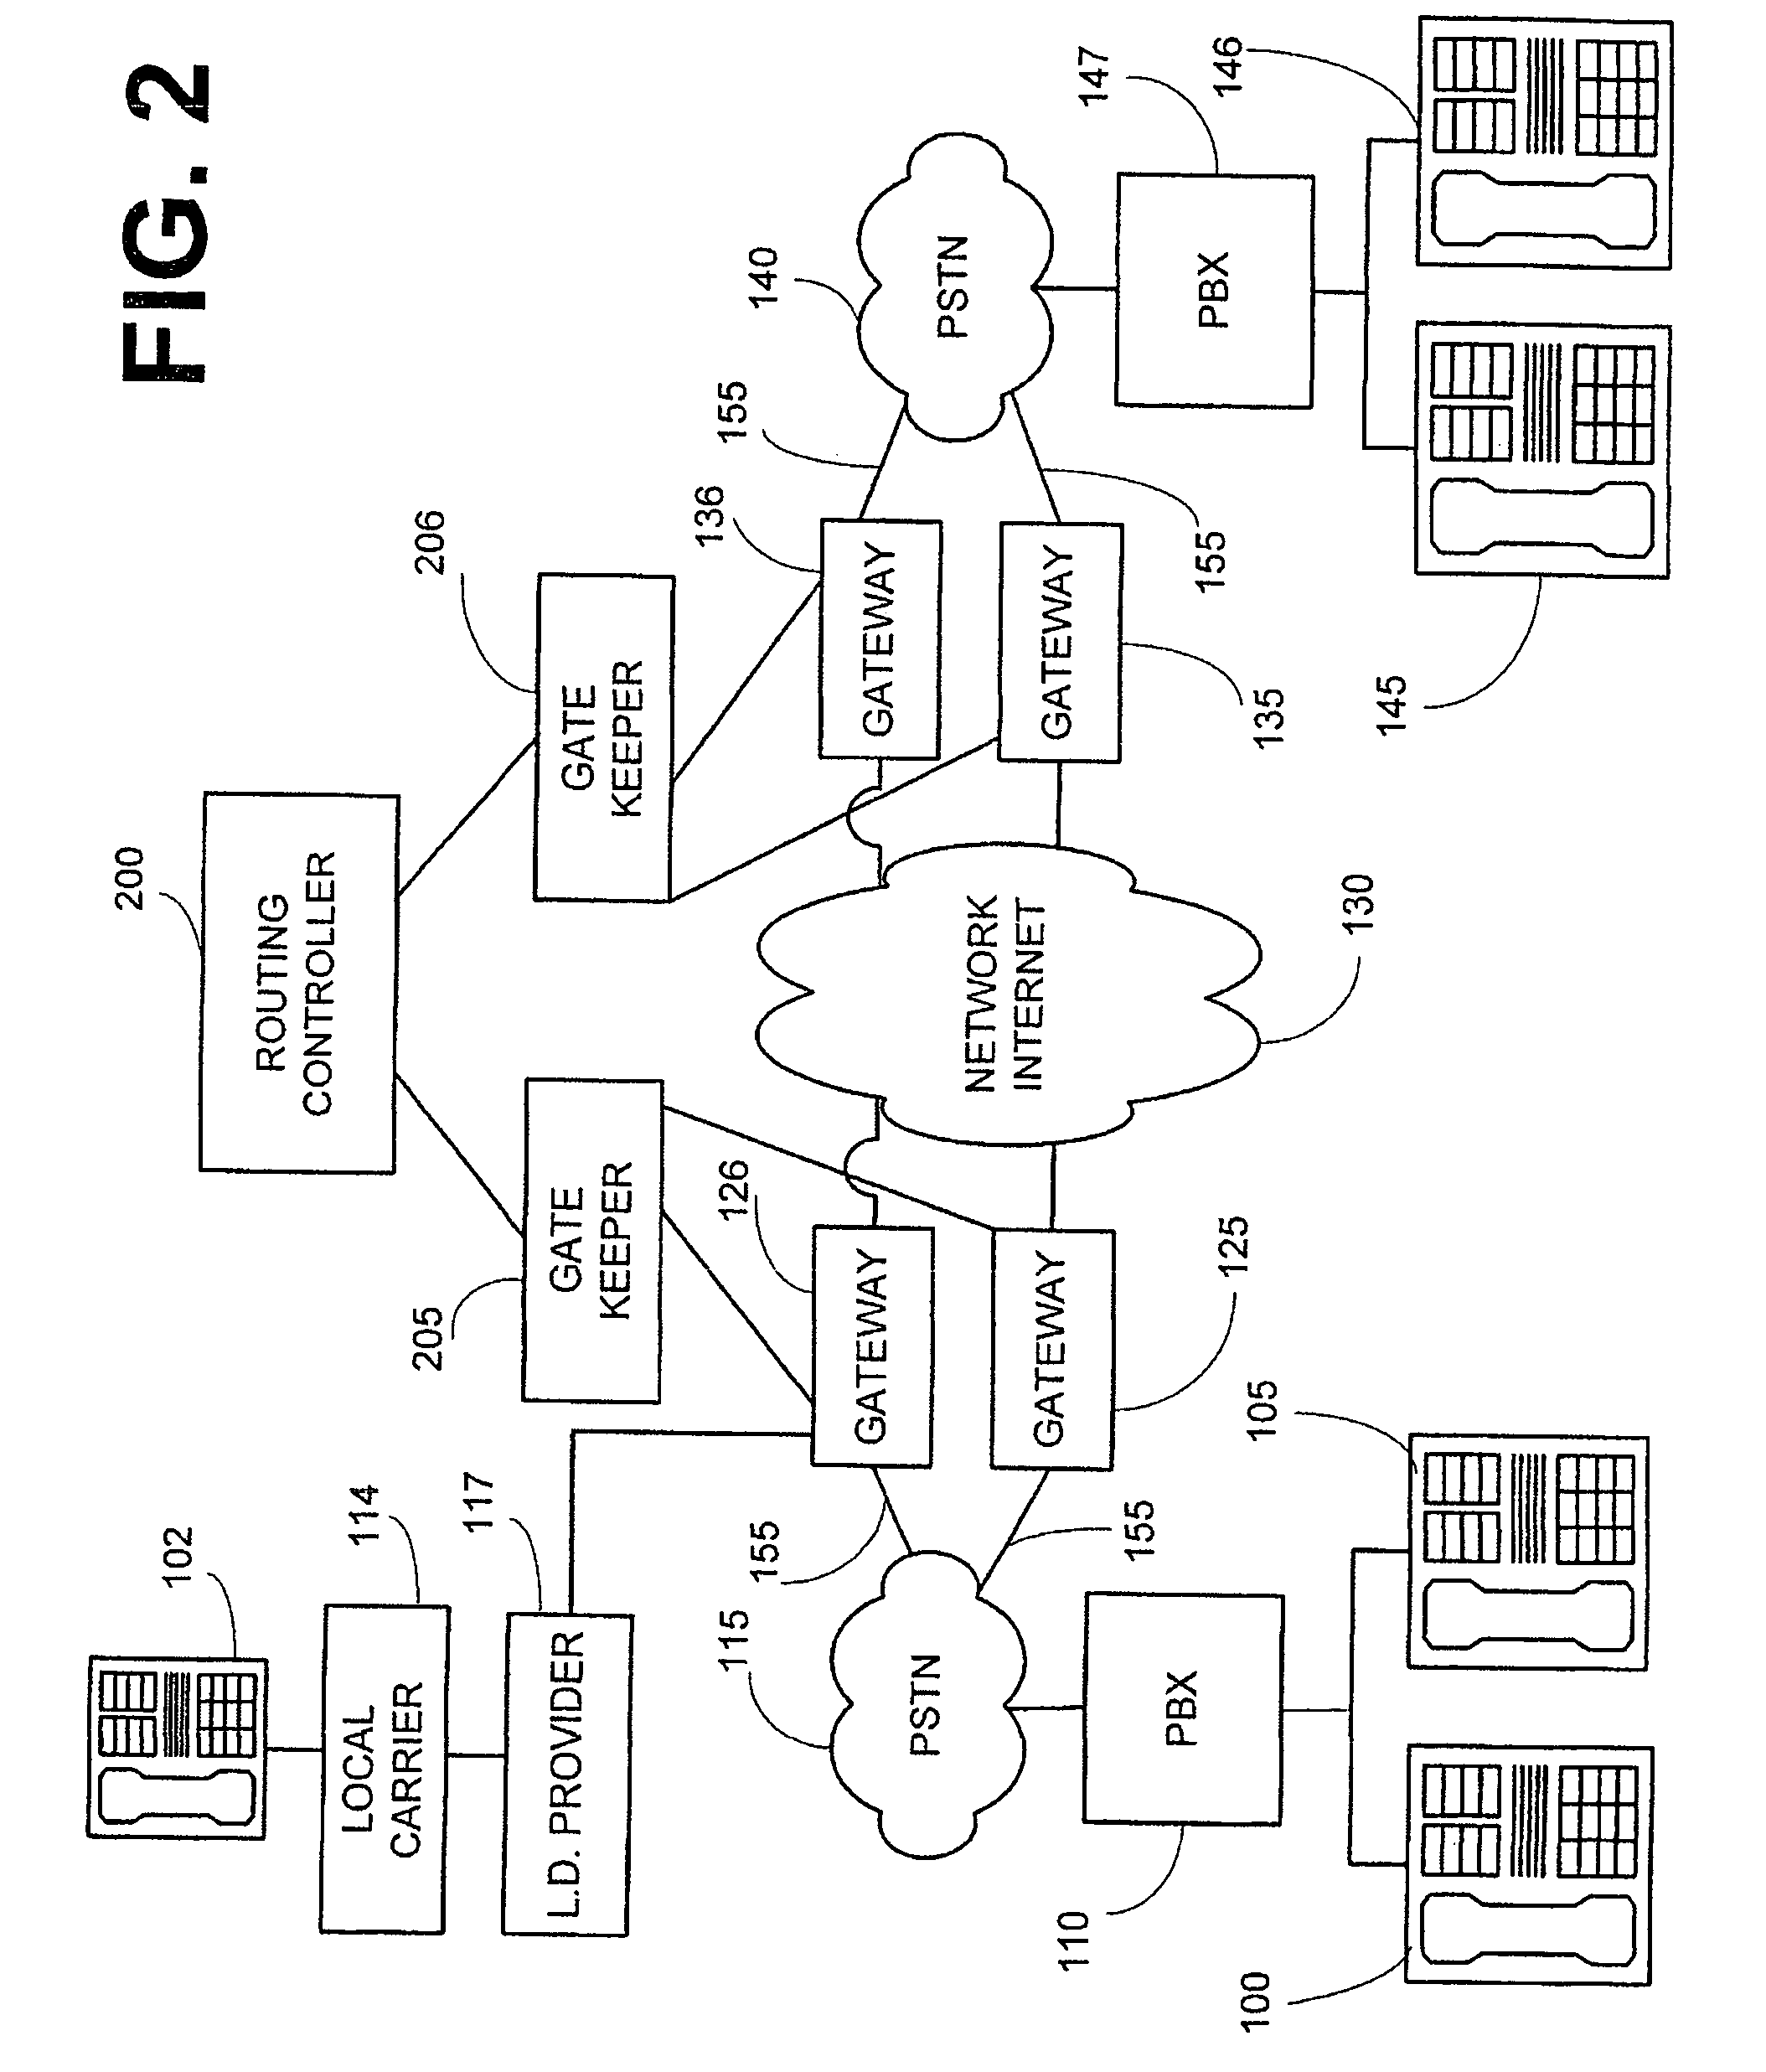 System and method for monitoring the volume of calls carried by a voice over internet protocol telephone system